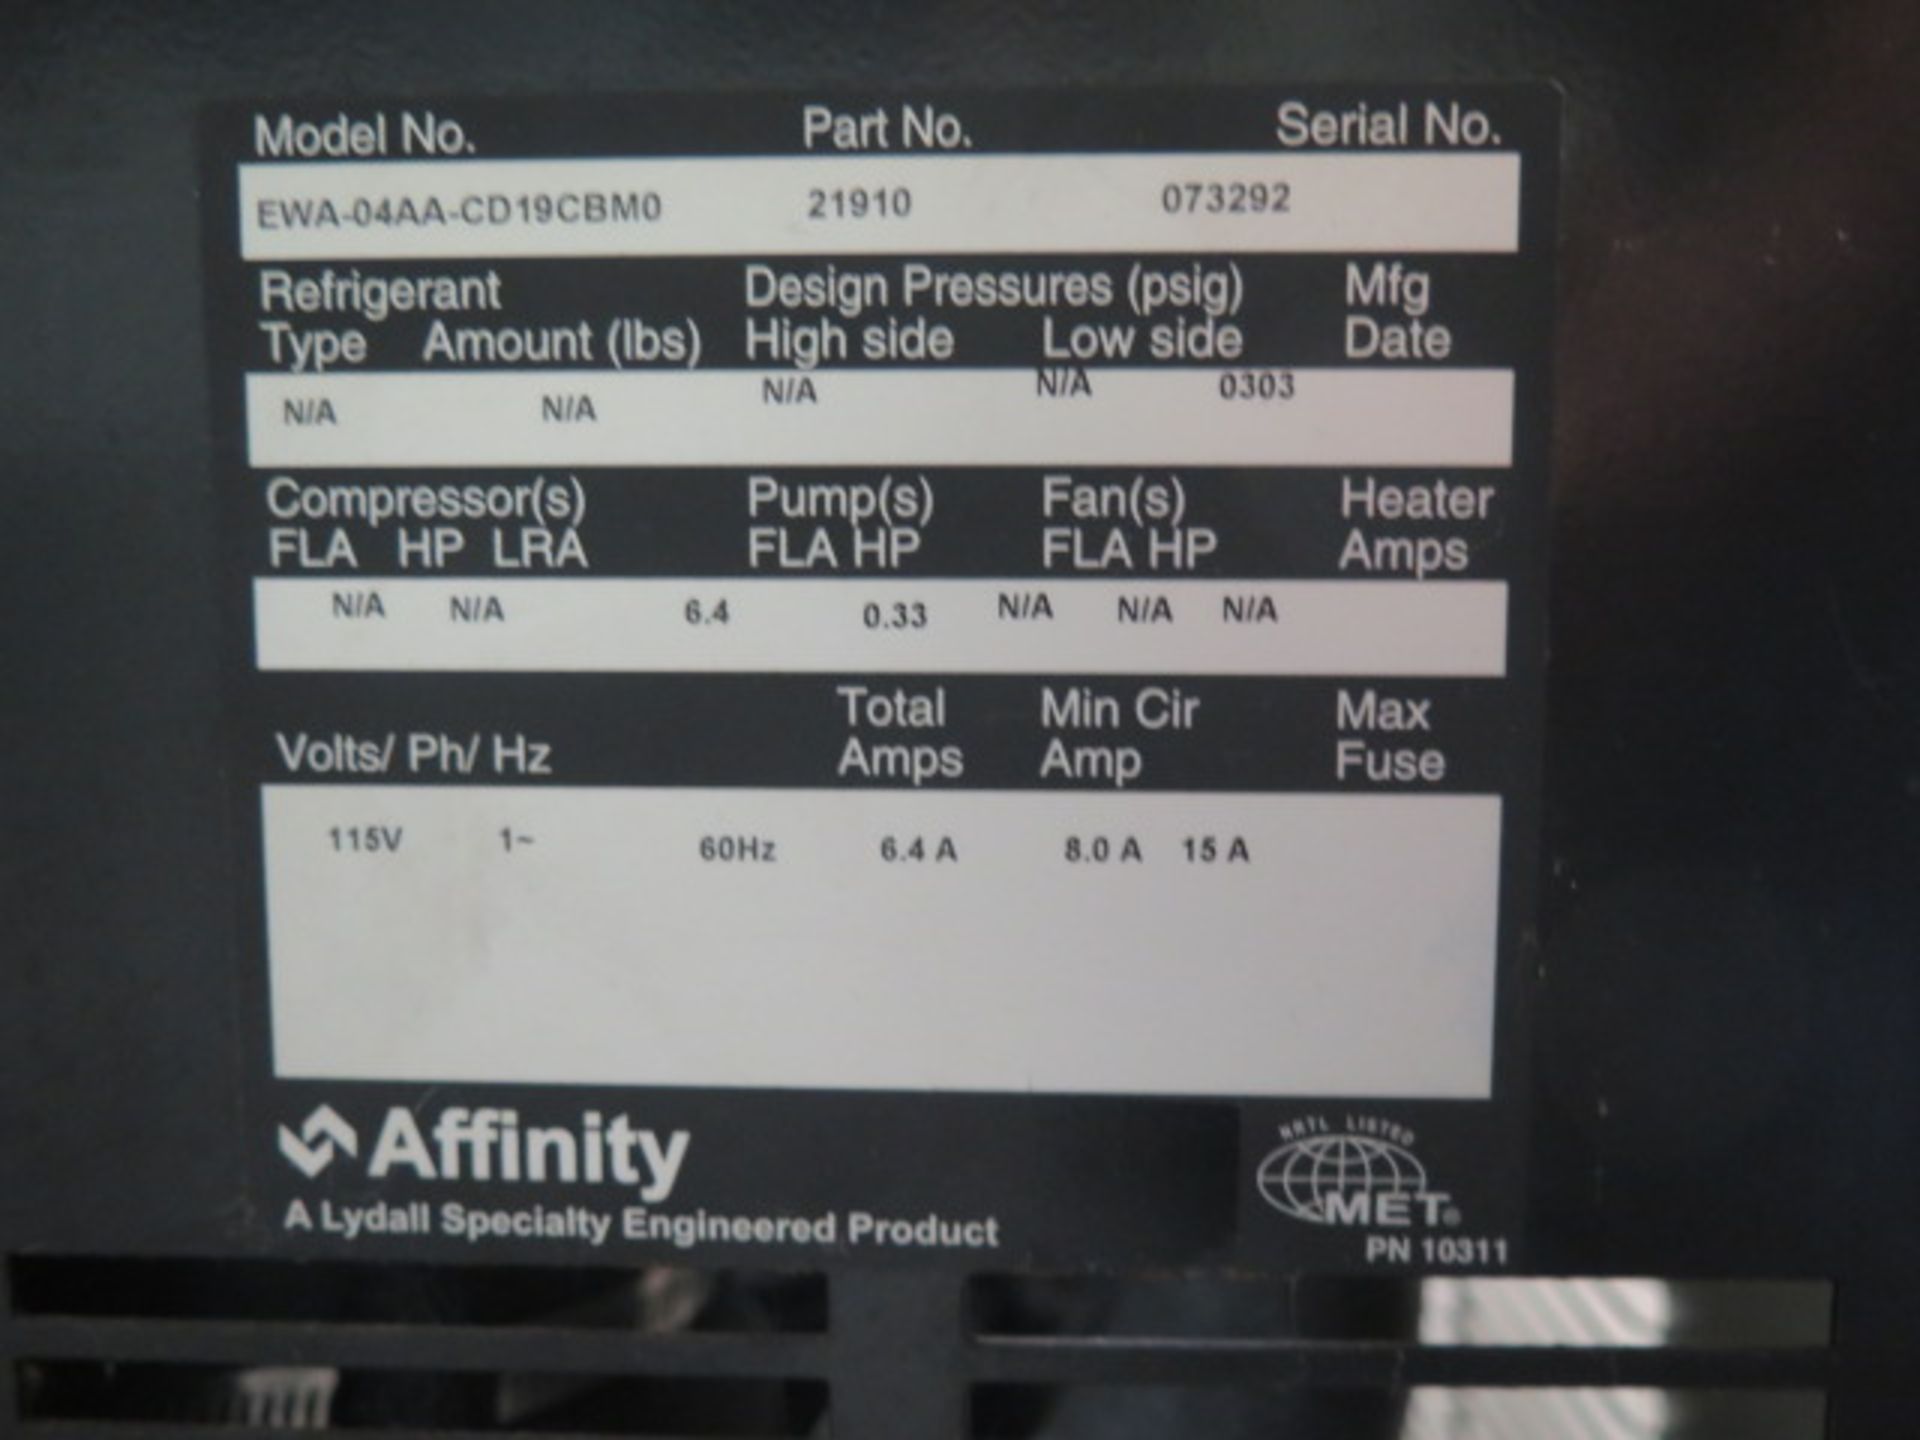 Affinity EWA-04AA-CD19CBM0 Water Cooled Heat Exchanger (SOLD AS-IS - NO WARRANTY) - Image 7 of 7